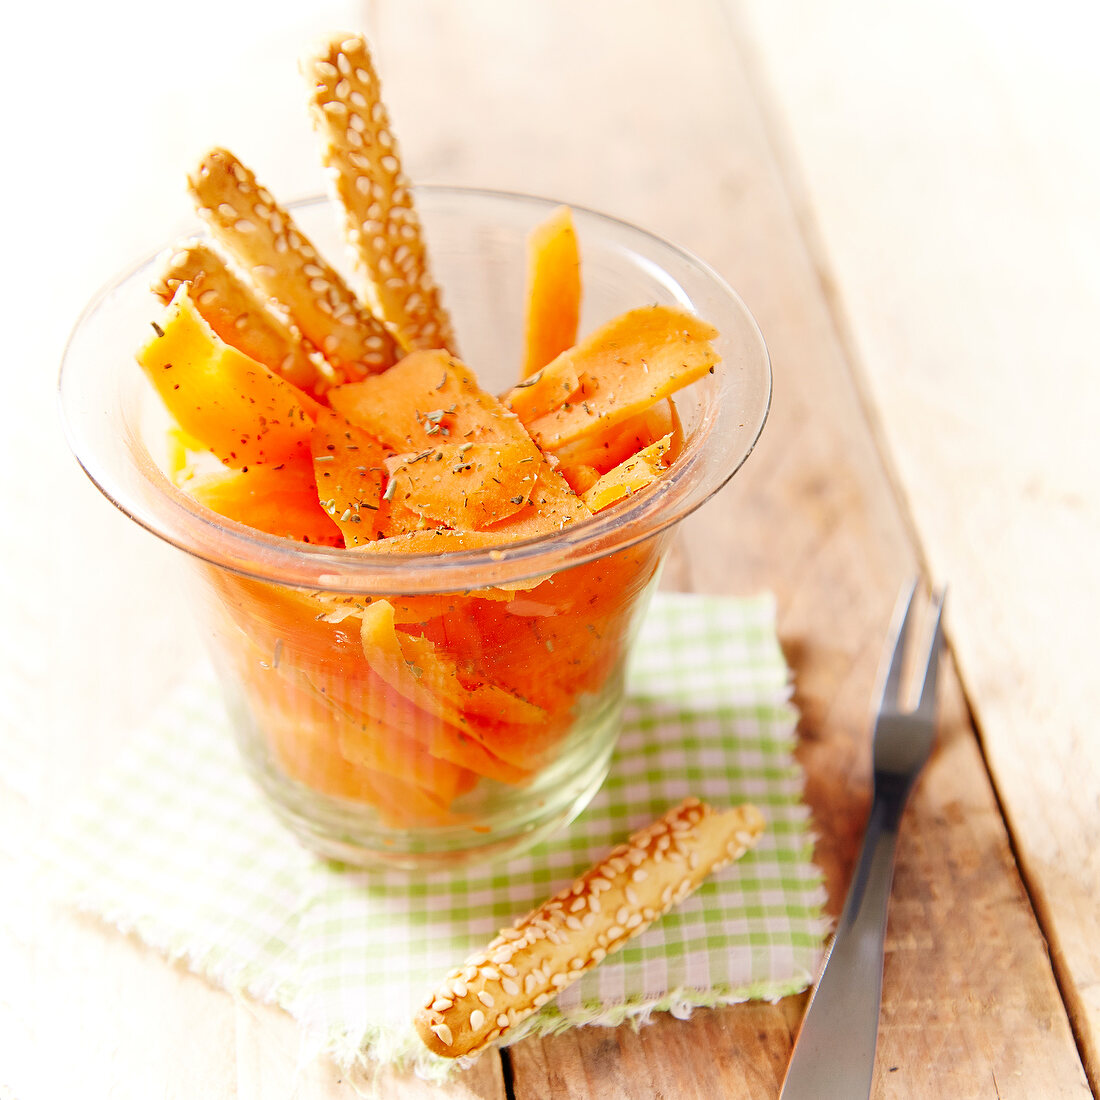 Carrot salad with herbs and breadsticks